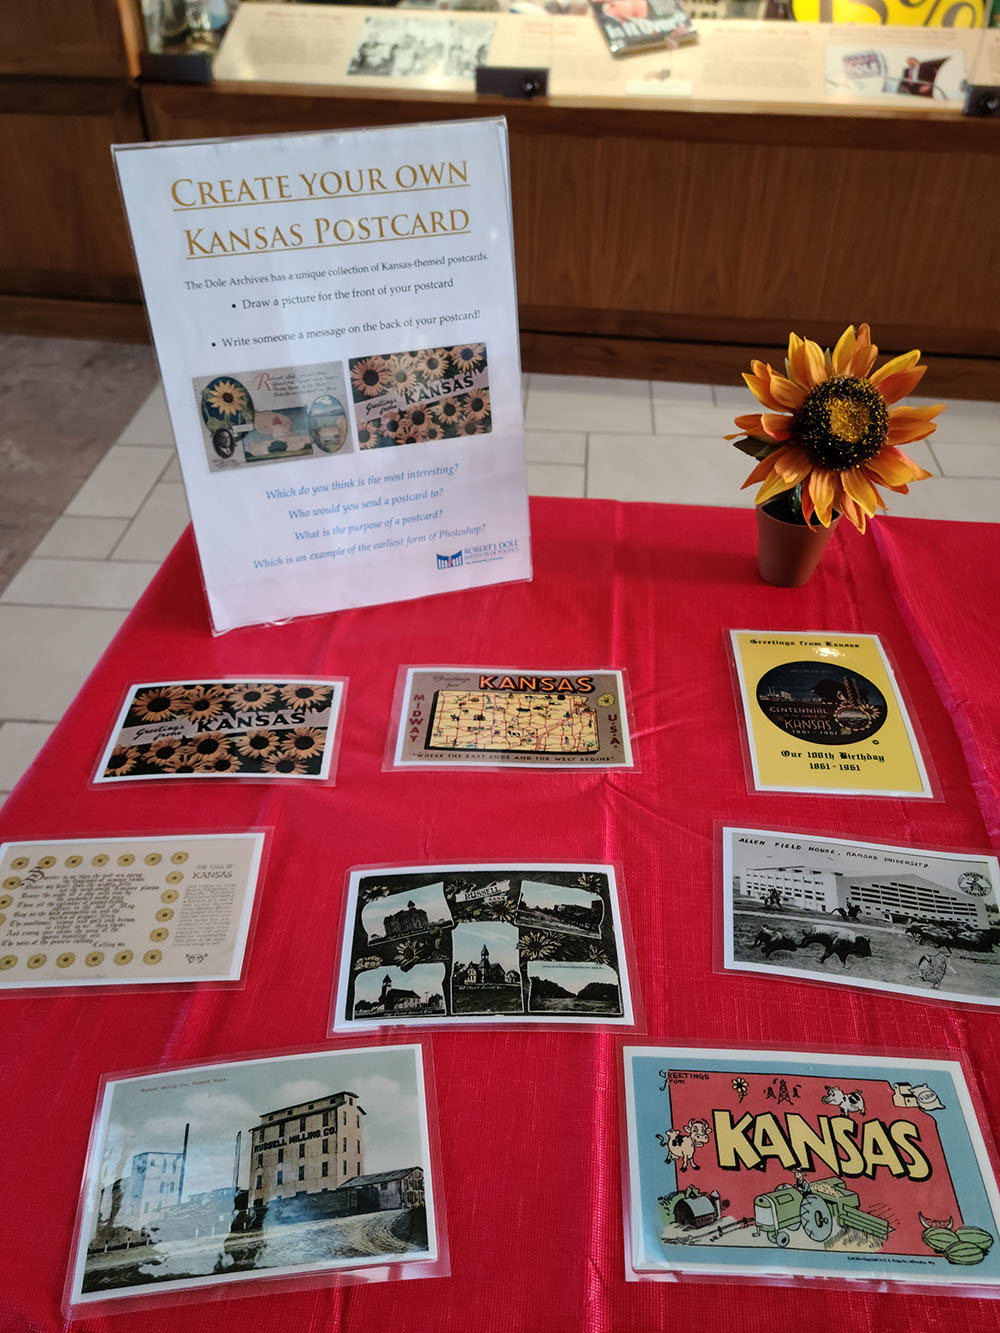 Table display shows Kansas themed postcards for the make your own postcard activity.